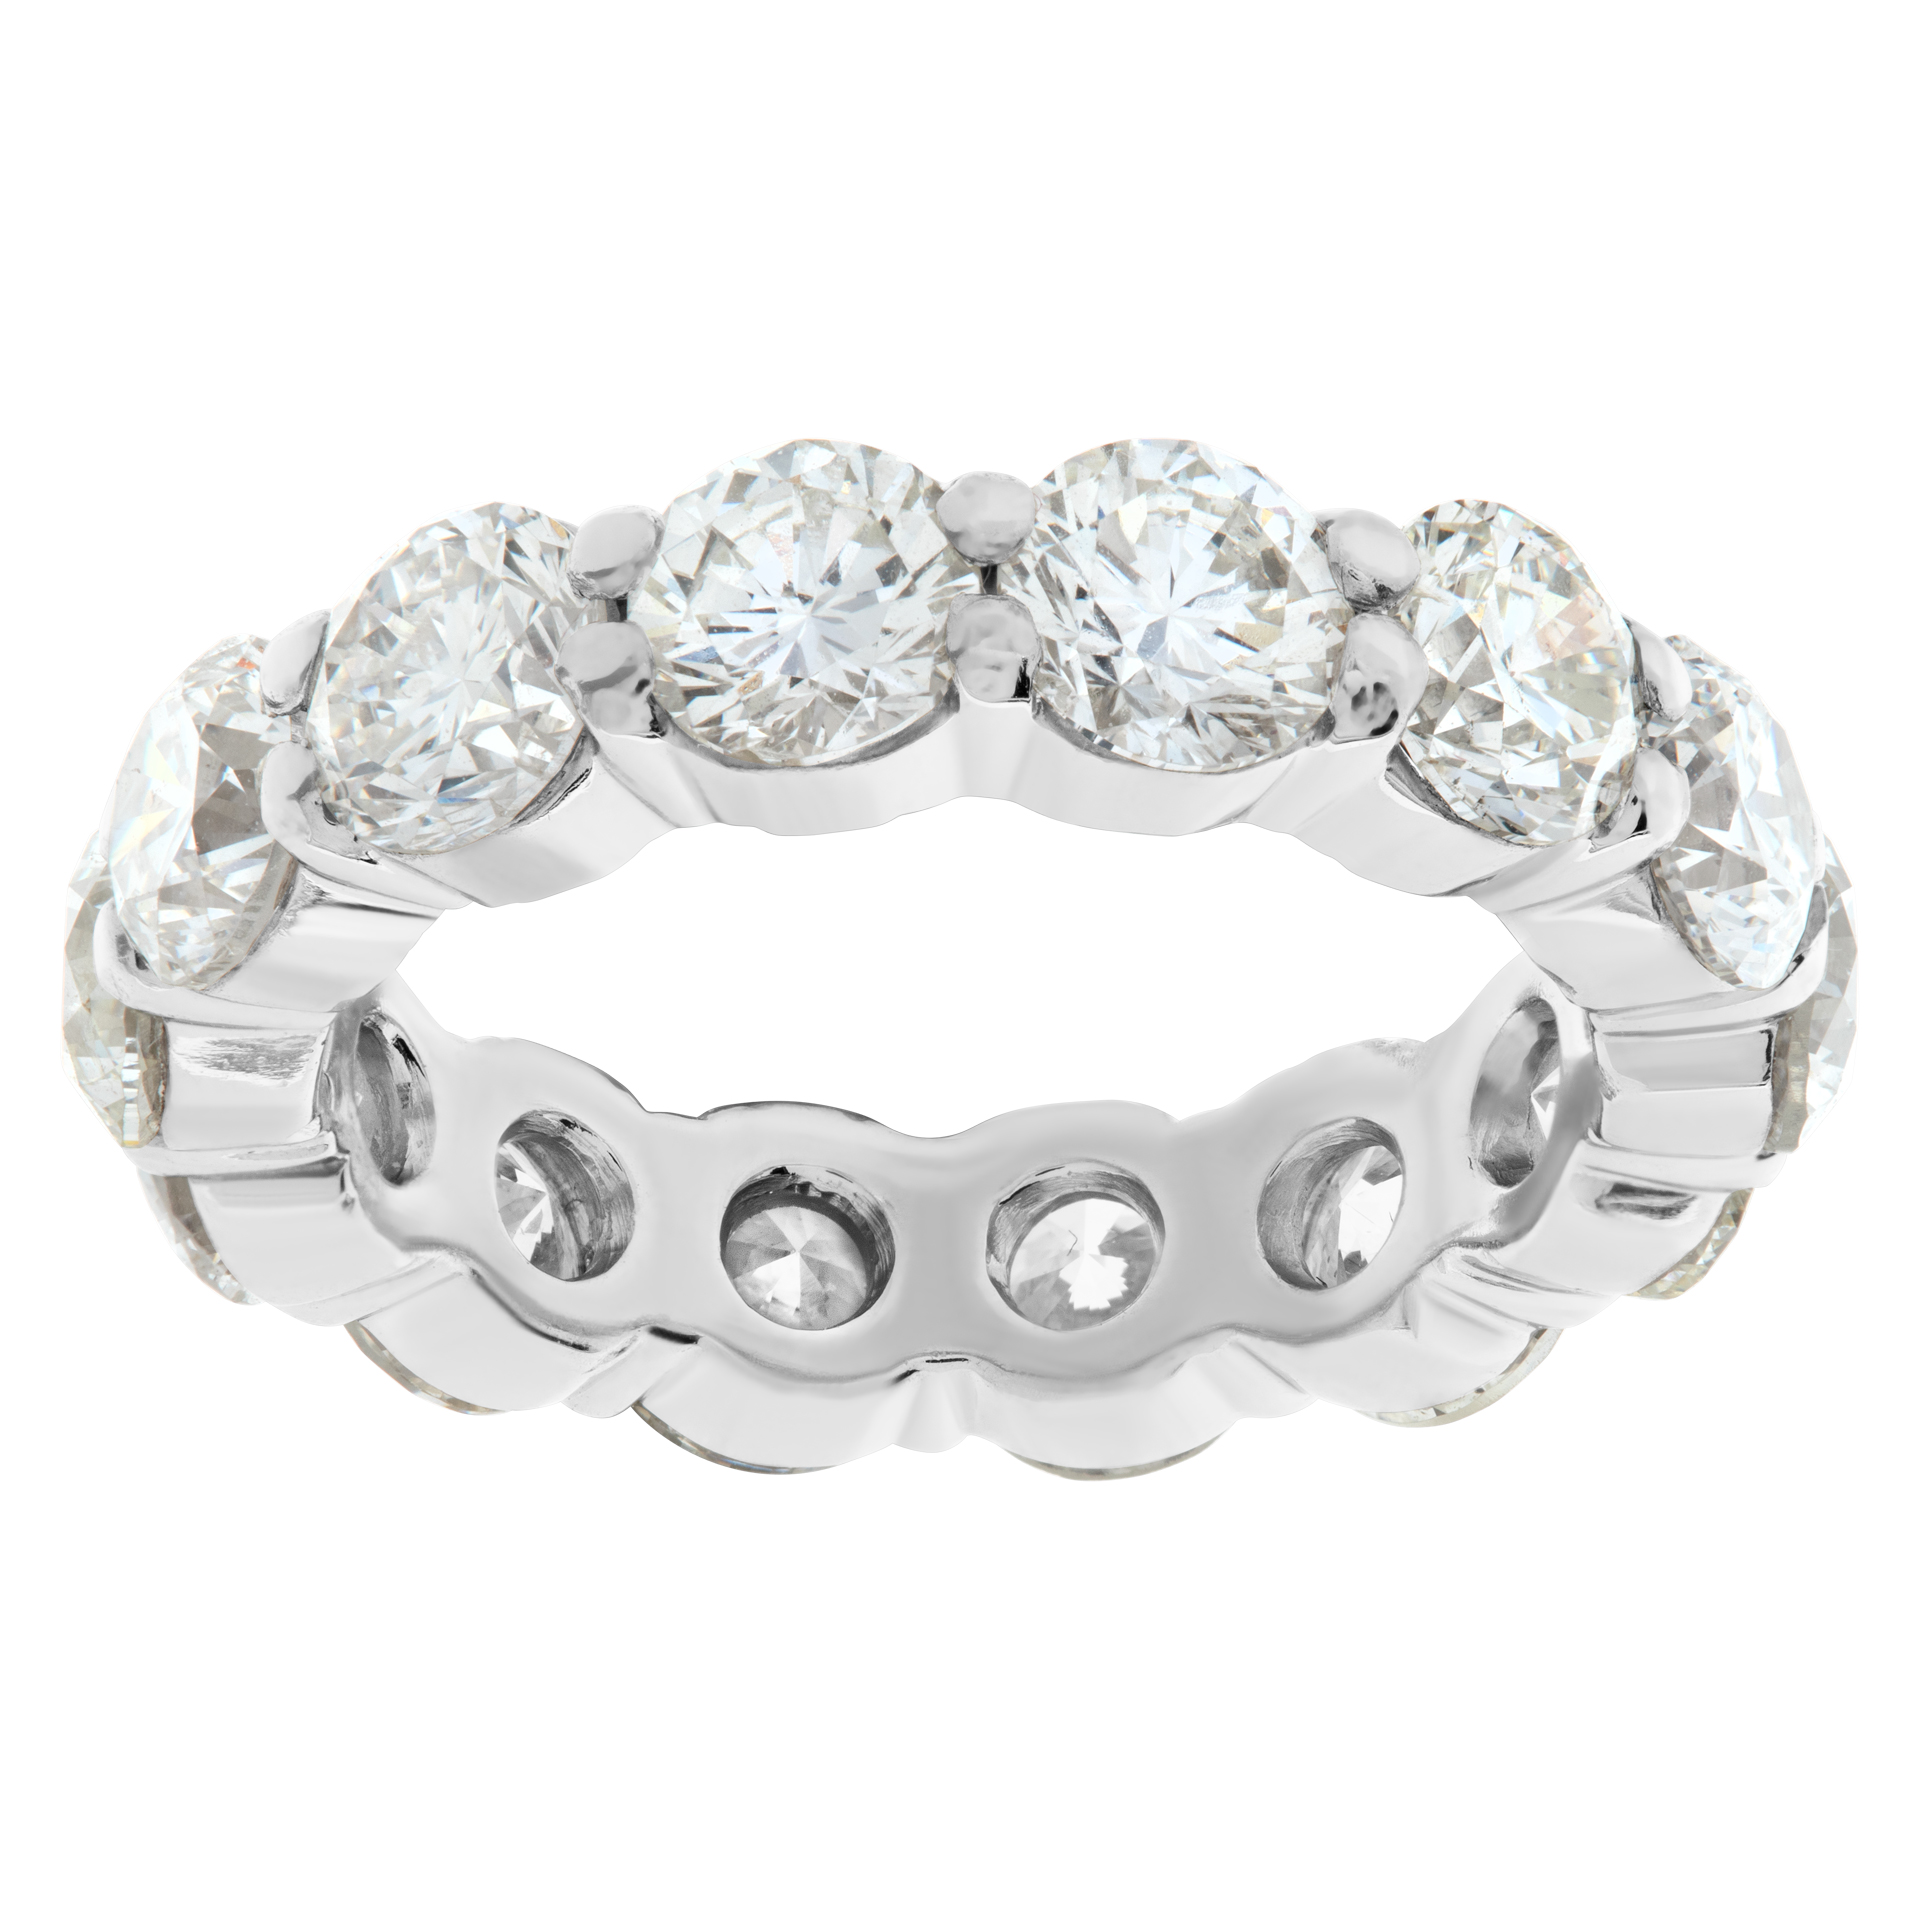 Platinum eternity band with approximately 5 carats in diamonds image 1